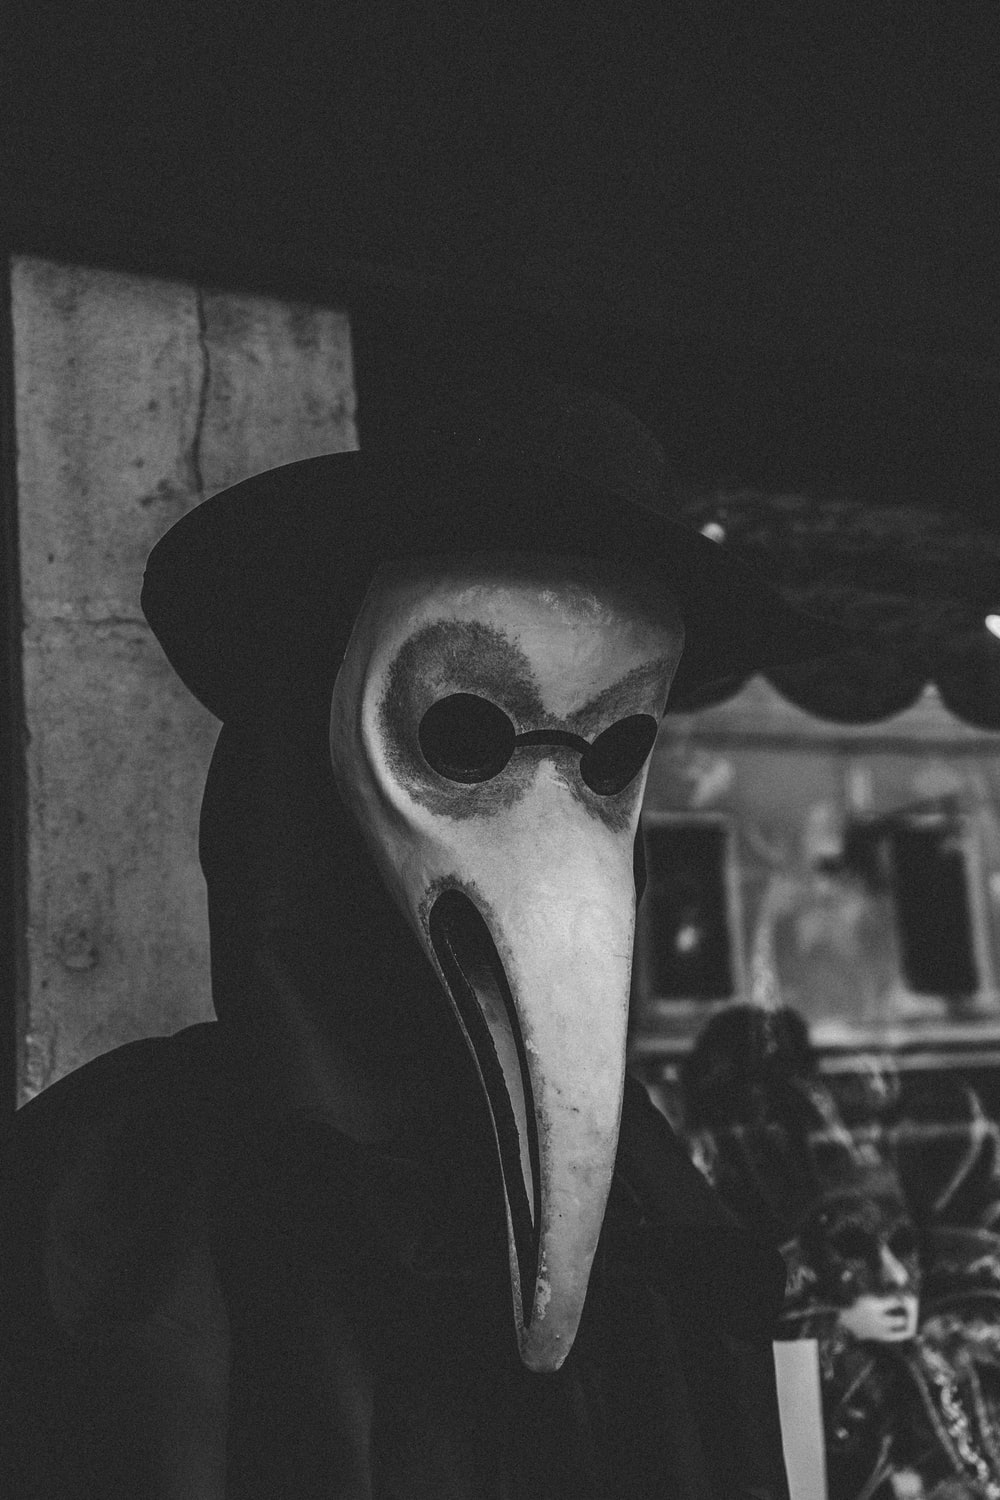 Plague Doctor Picture. Download Free Image